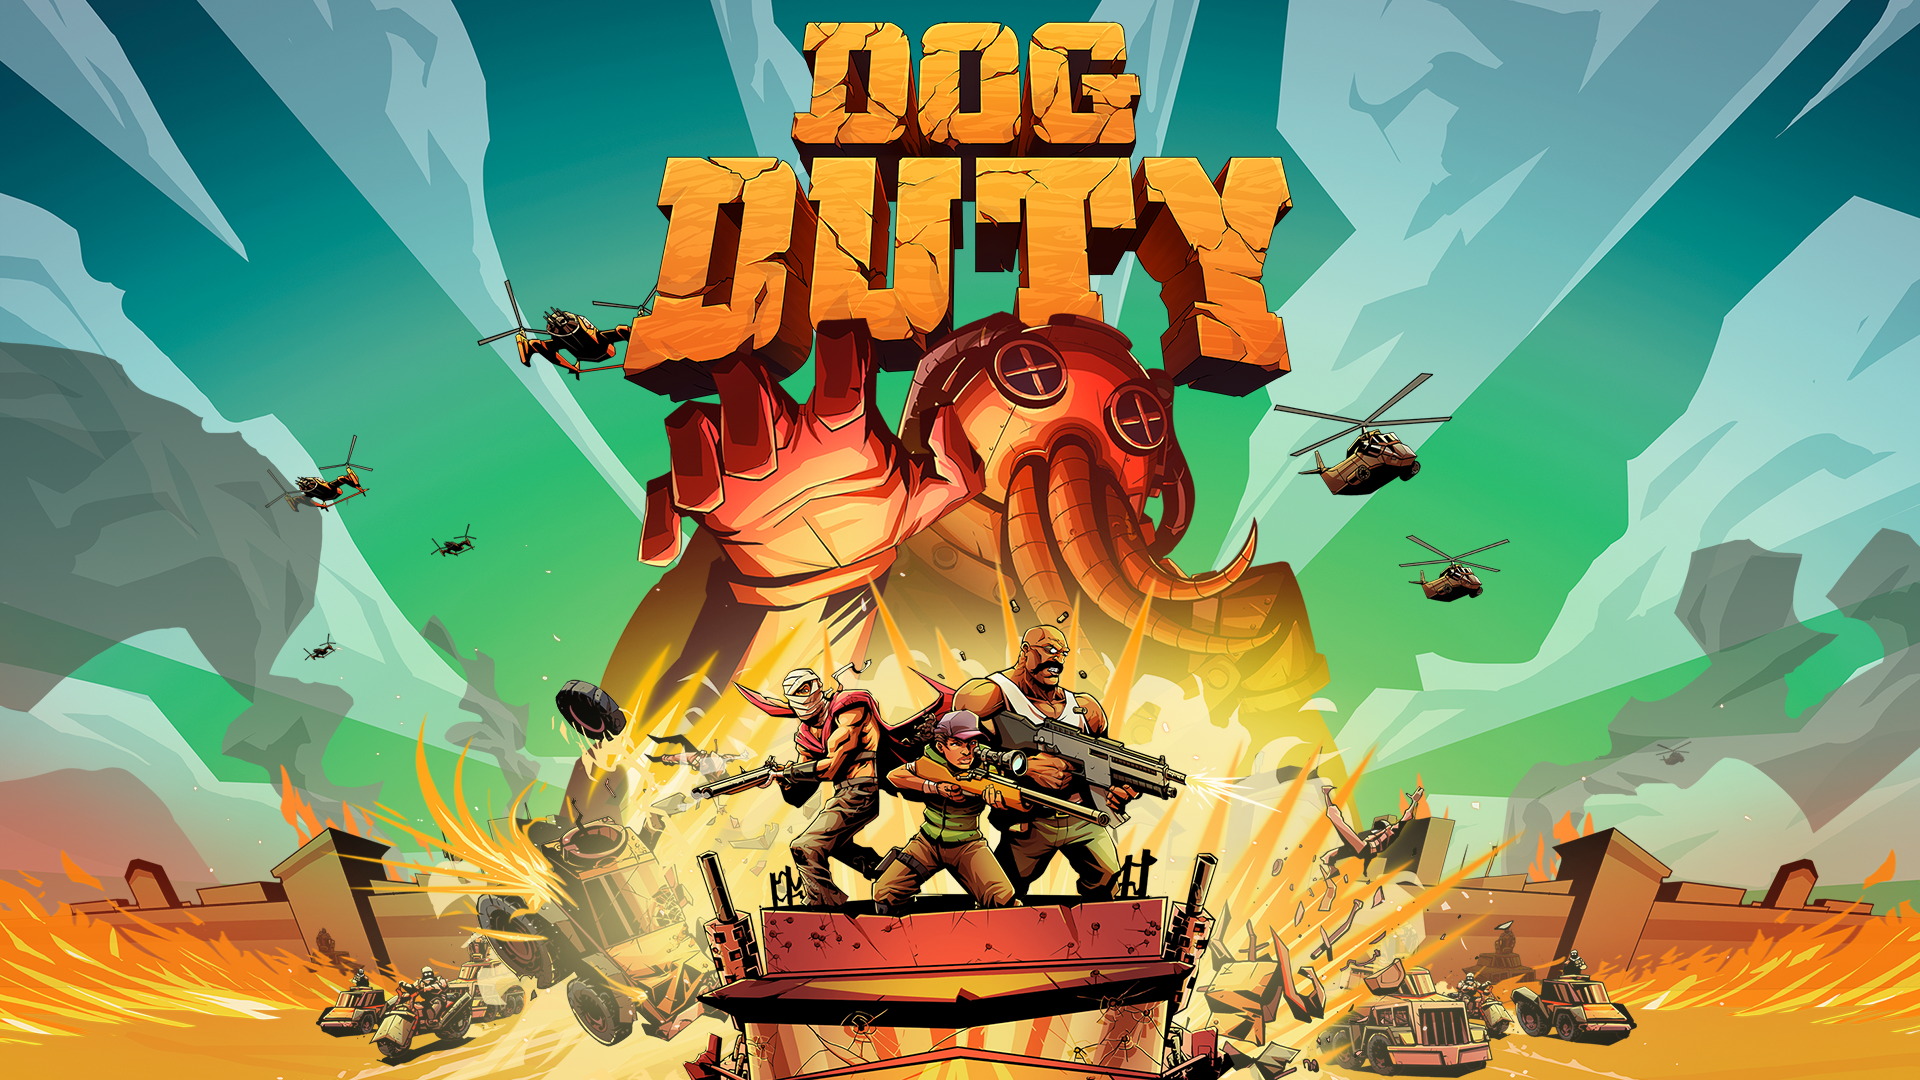 DOG DUTY Lets You Take the Octo-Army by Storm this Spring